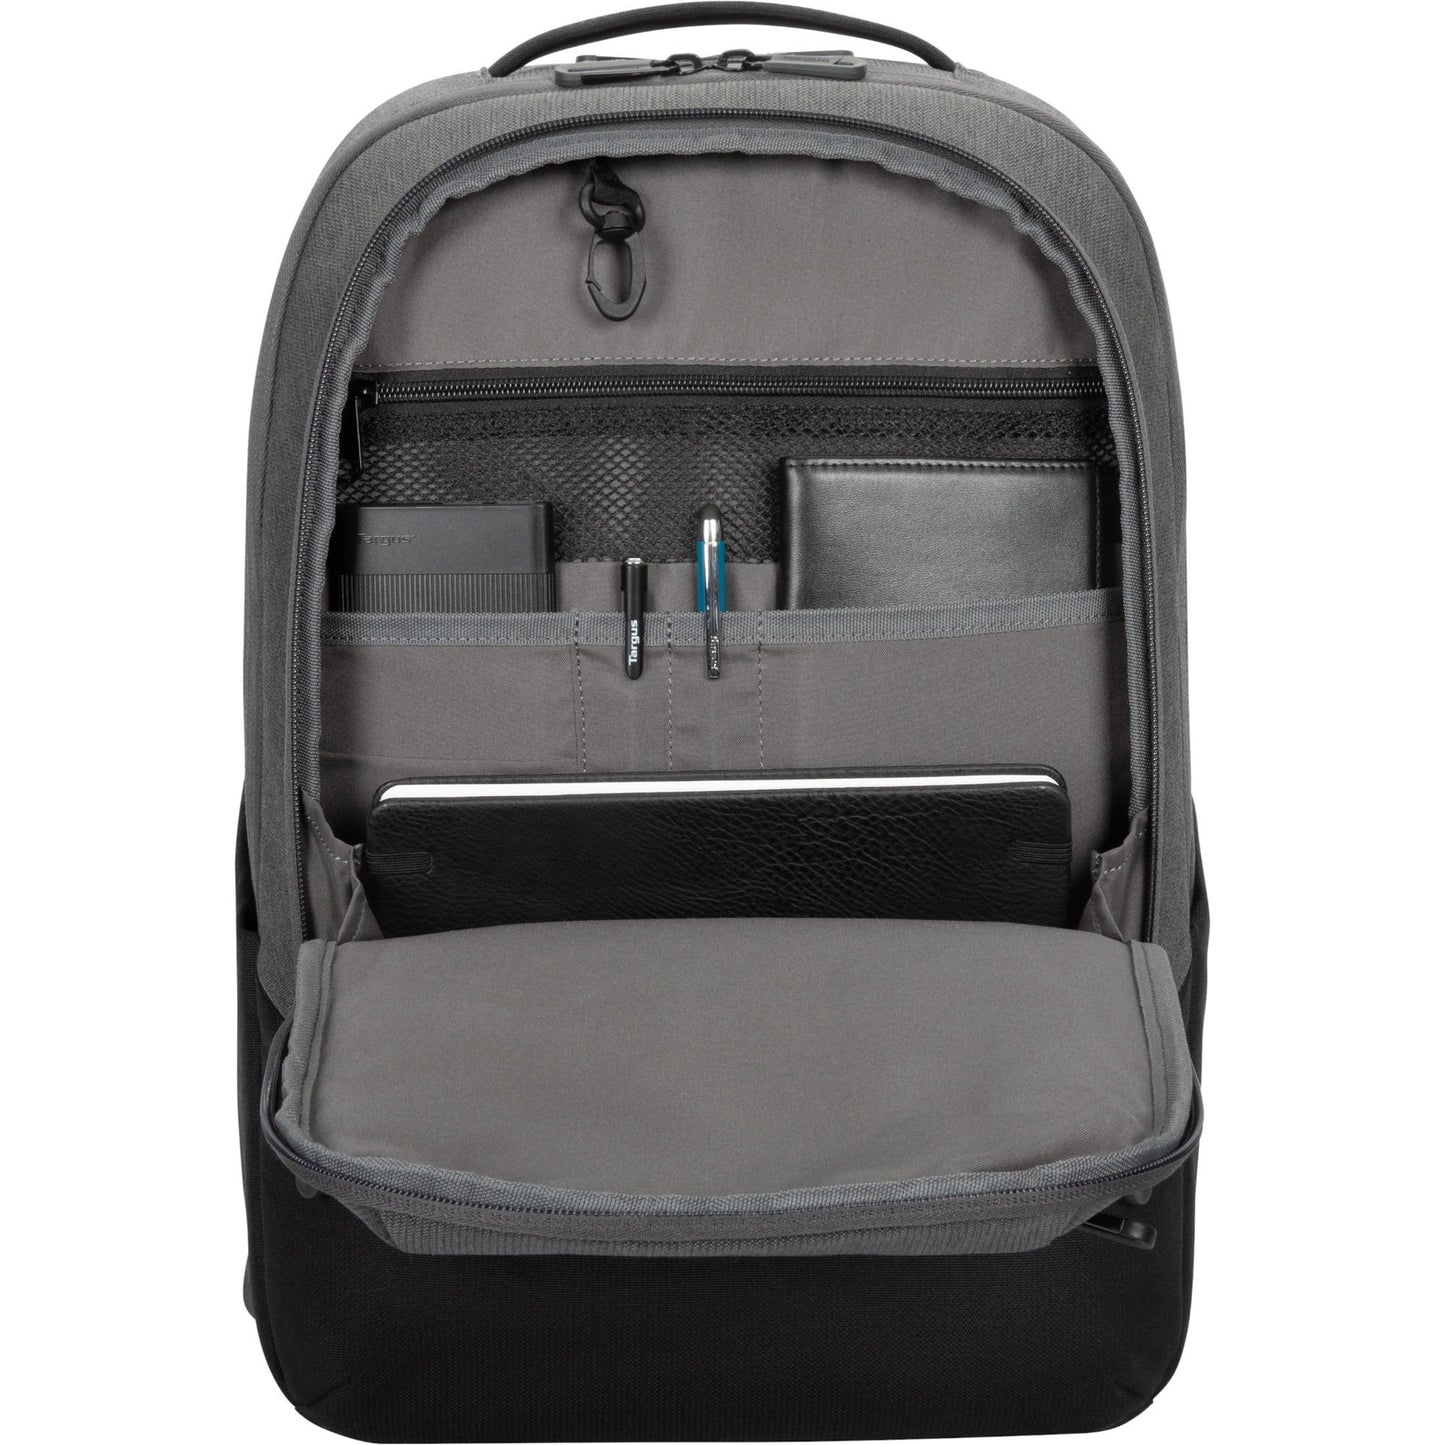 Targus Cypress Hero TBB94104GL Carrying Case (Backpack) for 15.6" Notebook Accessories - Gray